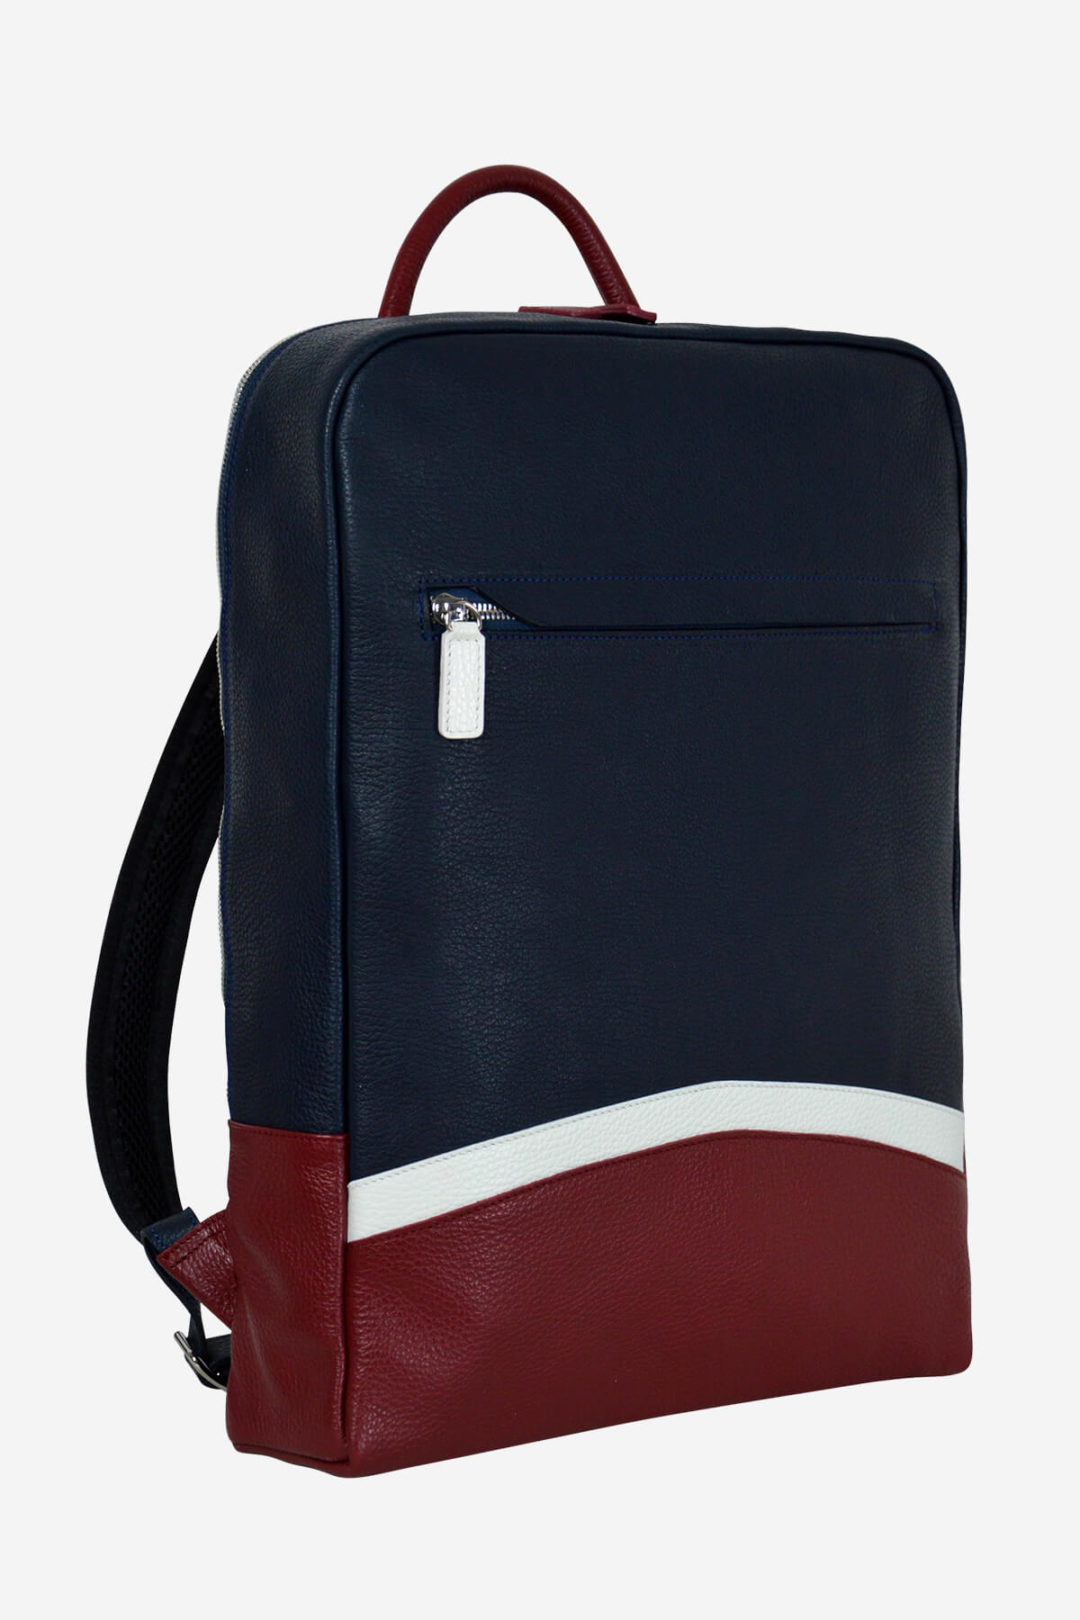 Italian Tradition in Fashion Sinuous Laptop Backpack front waterproof blue red white